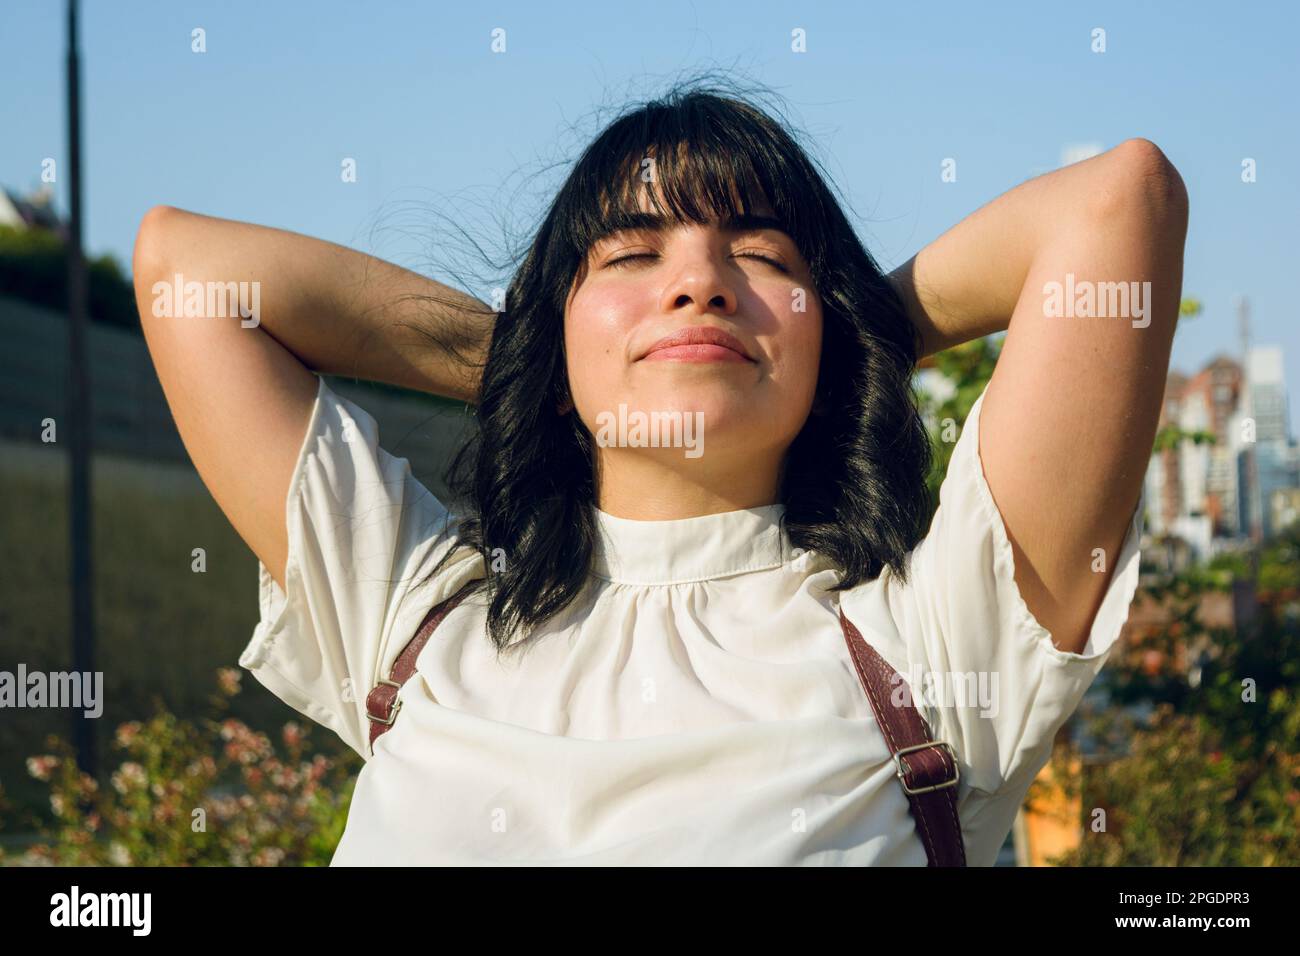 break from long class at university, young woman outdoors, sitting with arms behind head and eyes closed, relaxed and breathing. Stock Photo